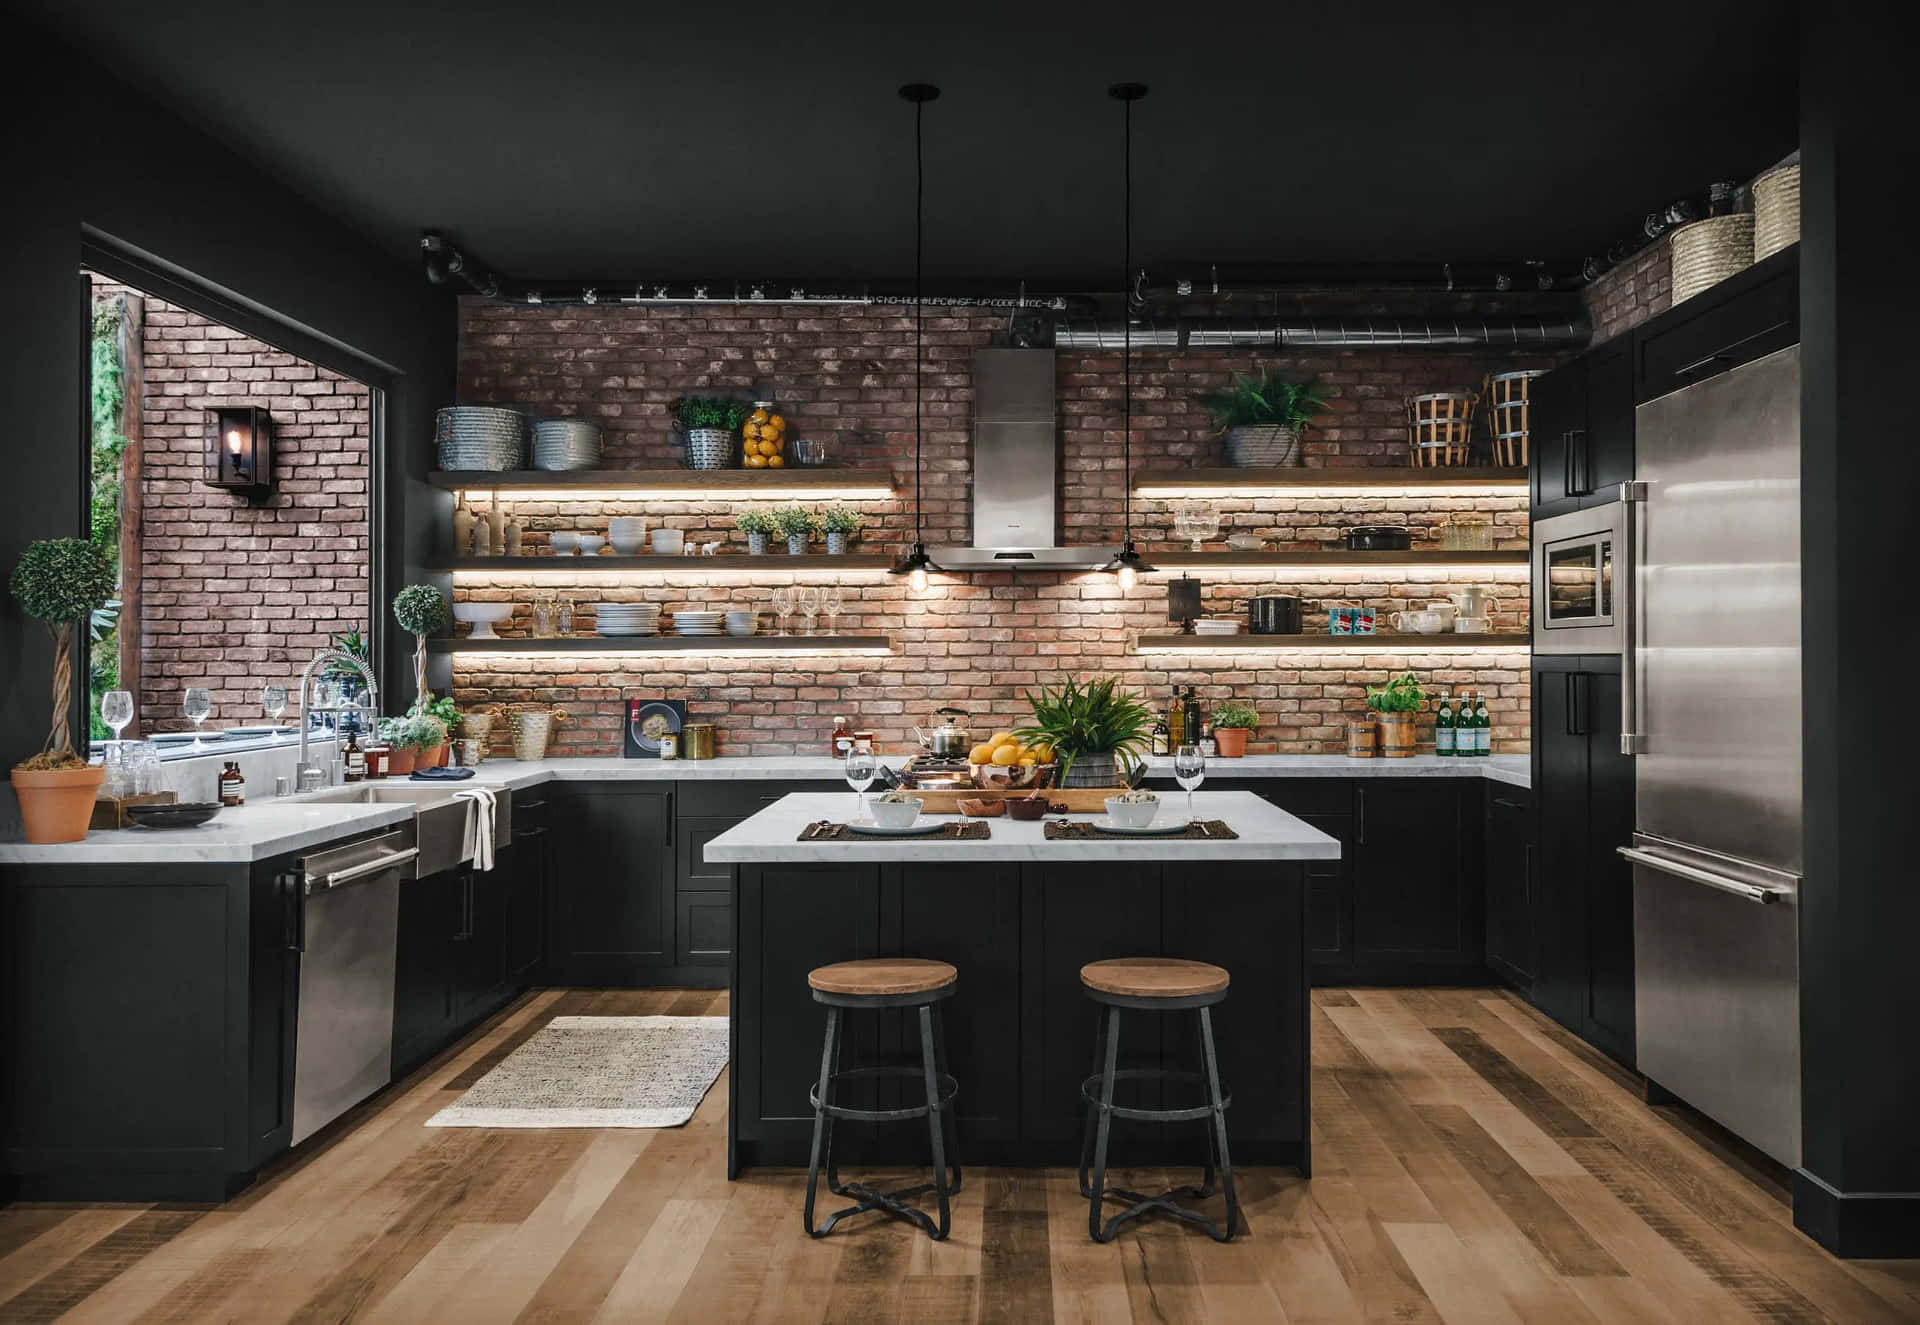 A Kitchen With Black Walls And Wooden Floors